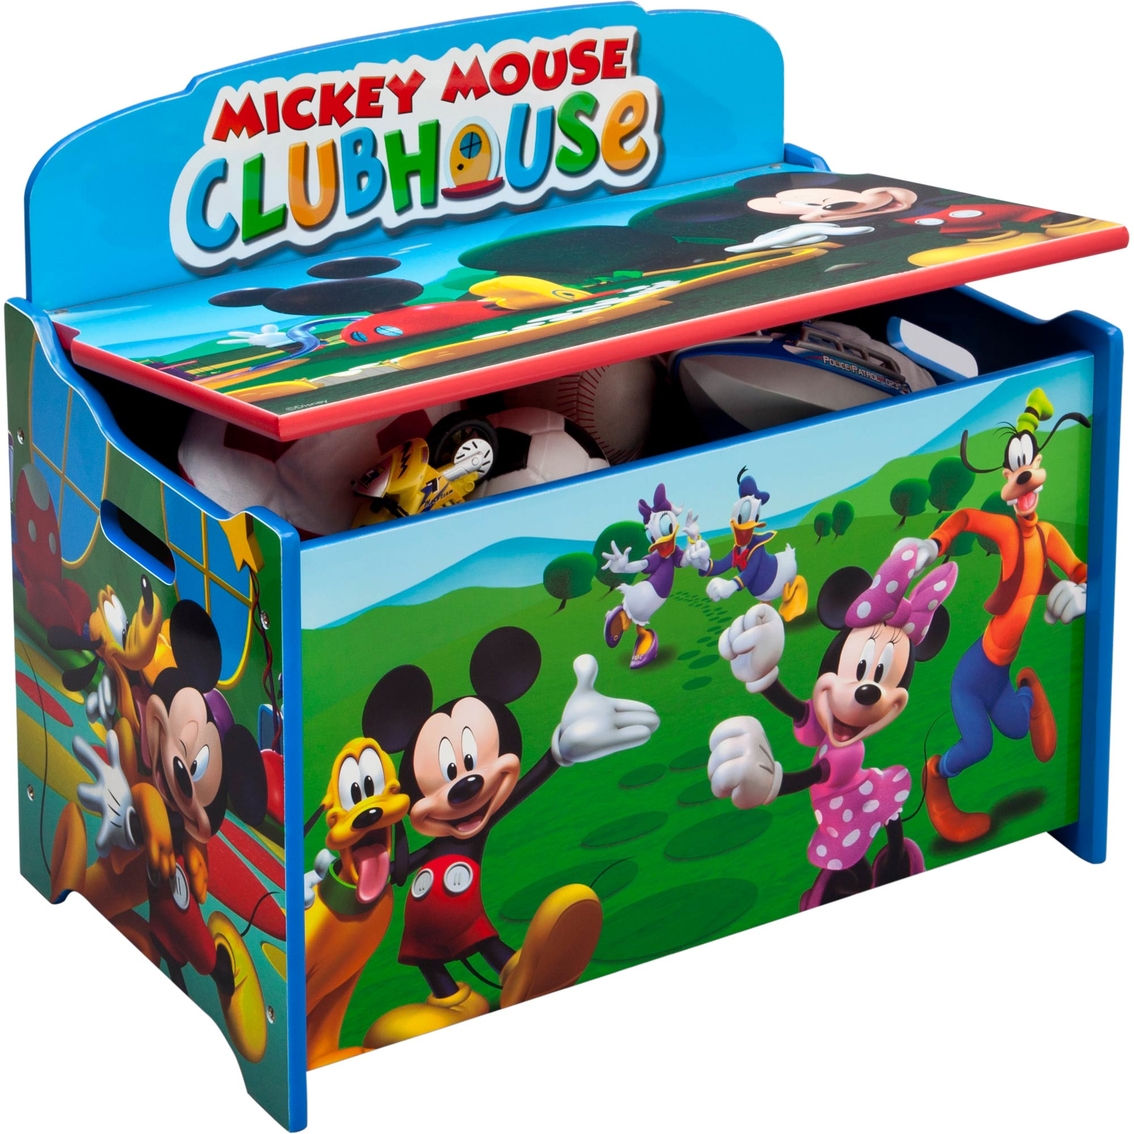 Disney Mickey Mouse Clubhouse Deluxe Toy Box - Image 2 of 4